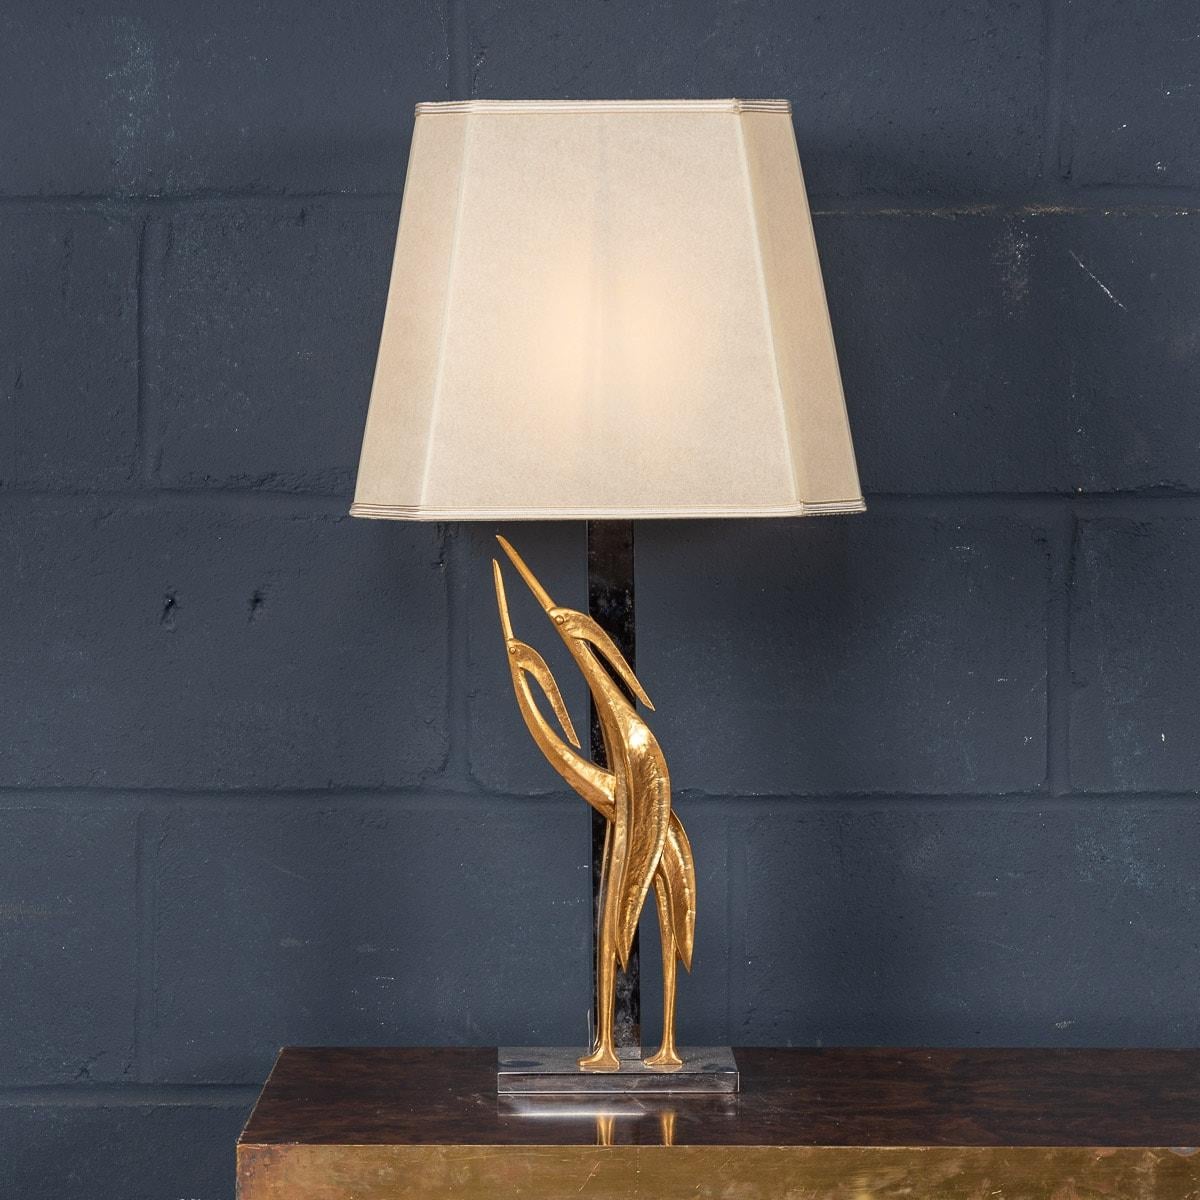 An exceptional late 1970s / early 1980s Hollywood Regency table lamp by Lanciotto Galeotti for L' Originale, in Florence, Italy. An extremely high quality gilded bronze and chrome sculpture, the stem of the lamp has an applied heron, typical of